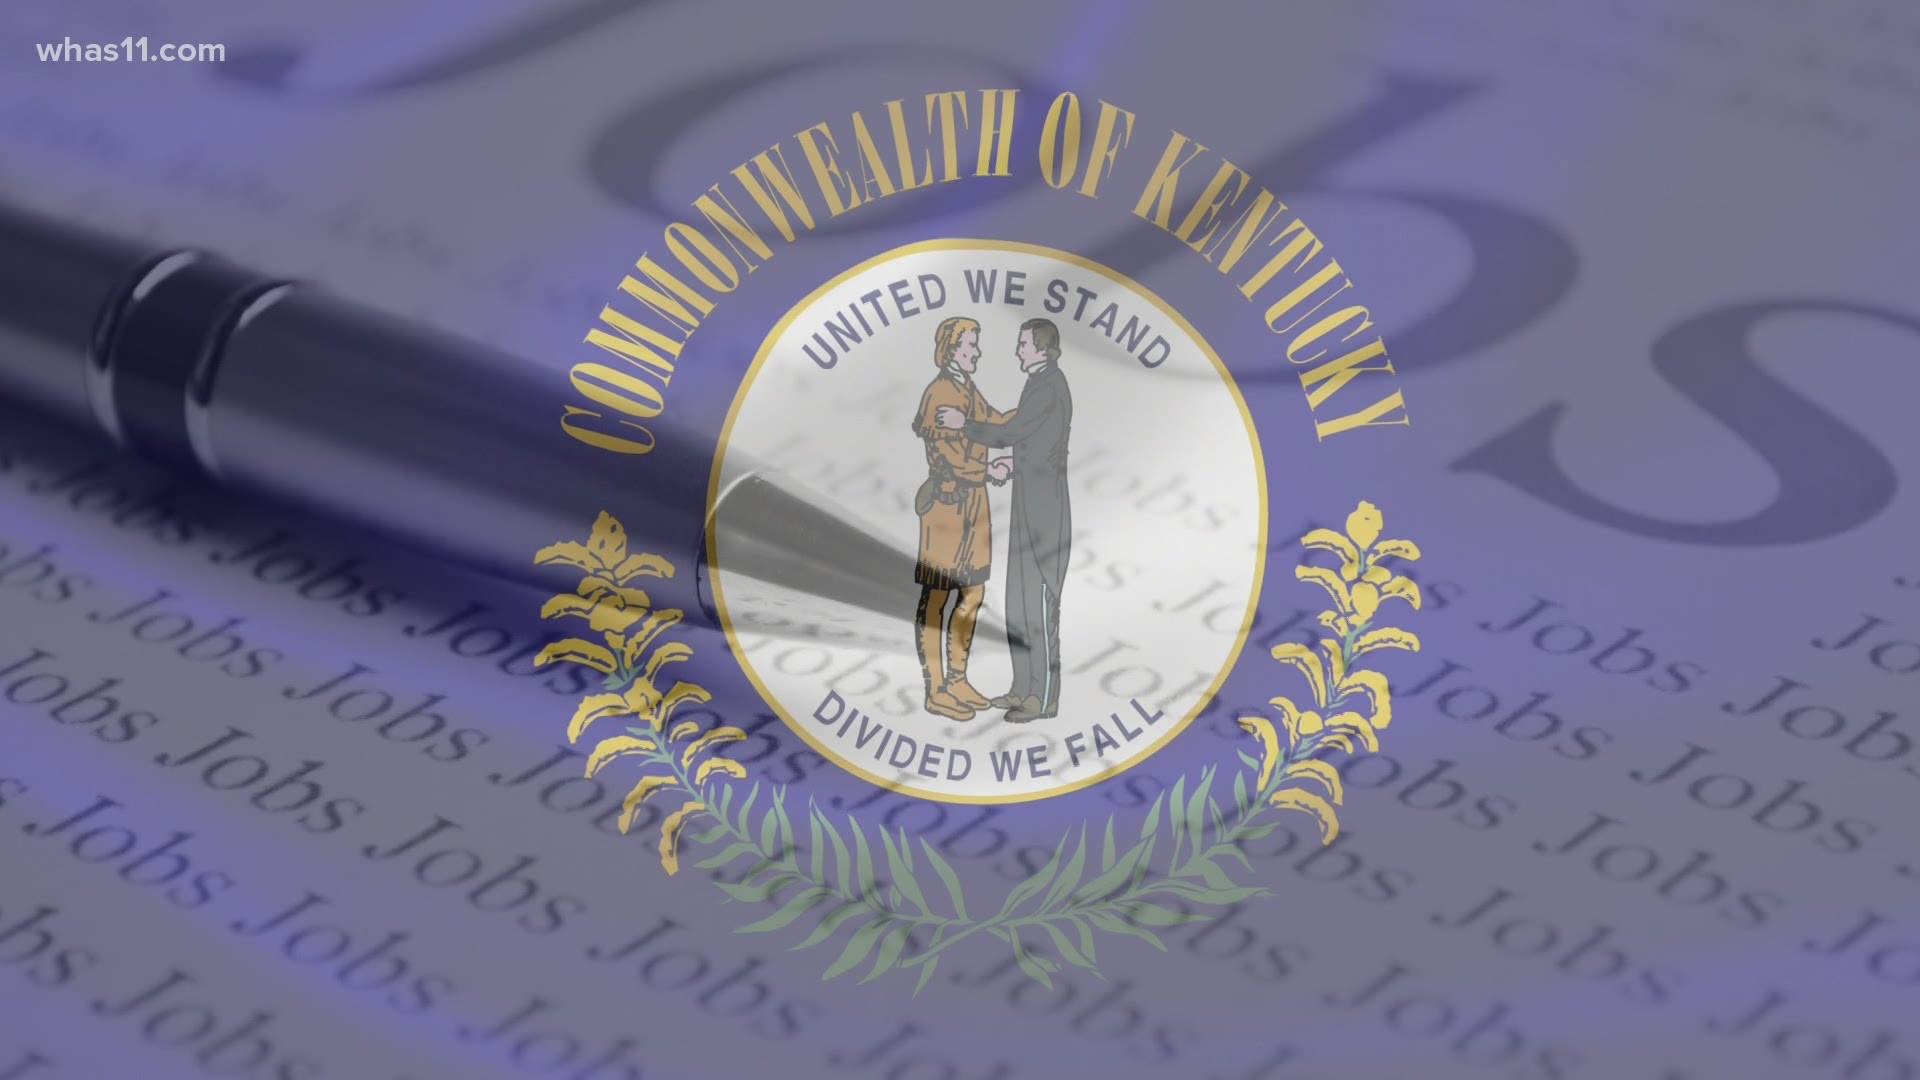 Many people are experiencing issues with the Kentucky unemployment verification system and some feel it has led to their identity being stolen.